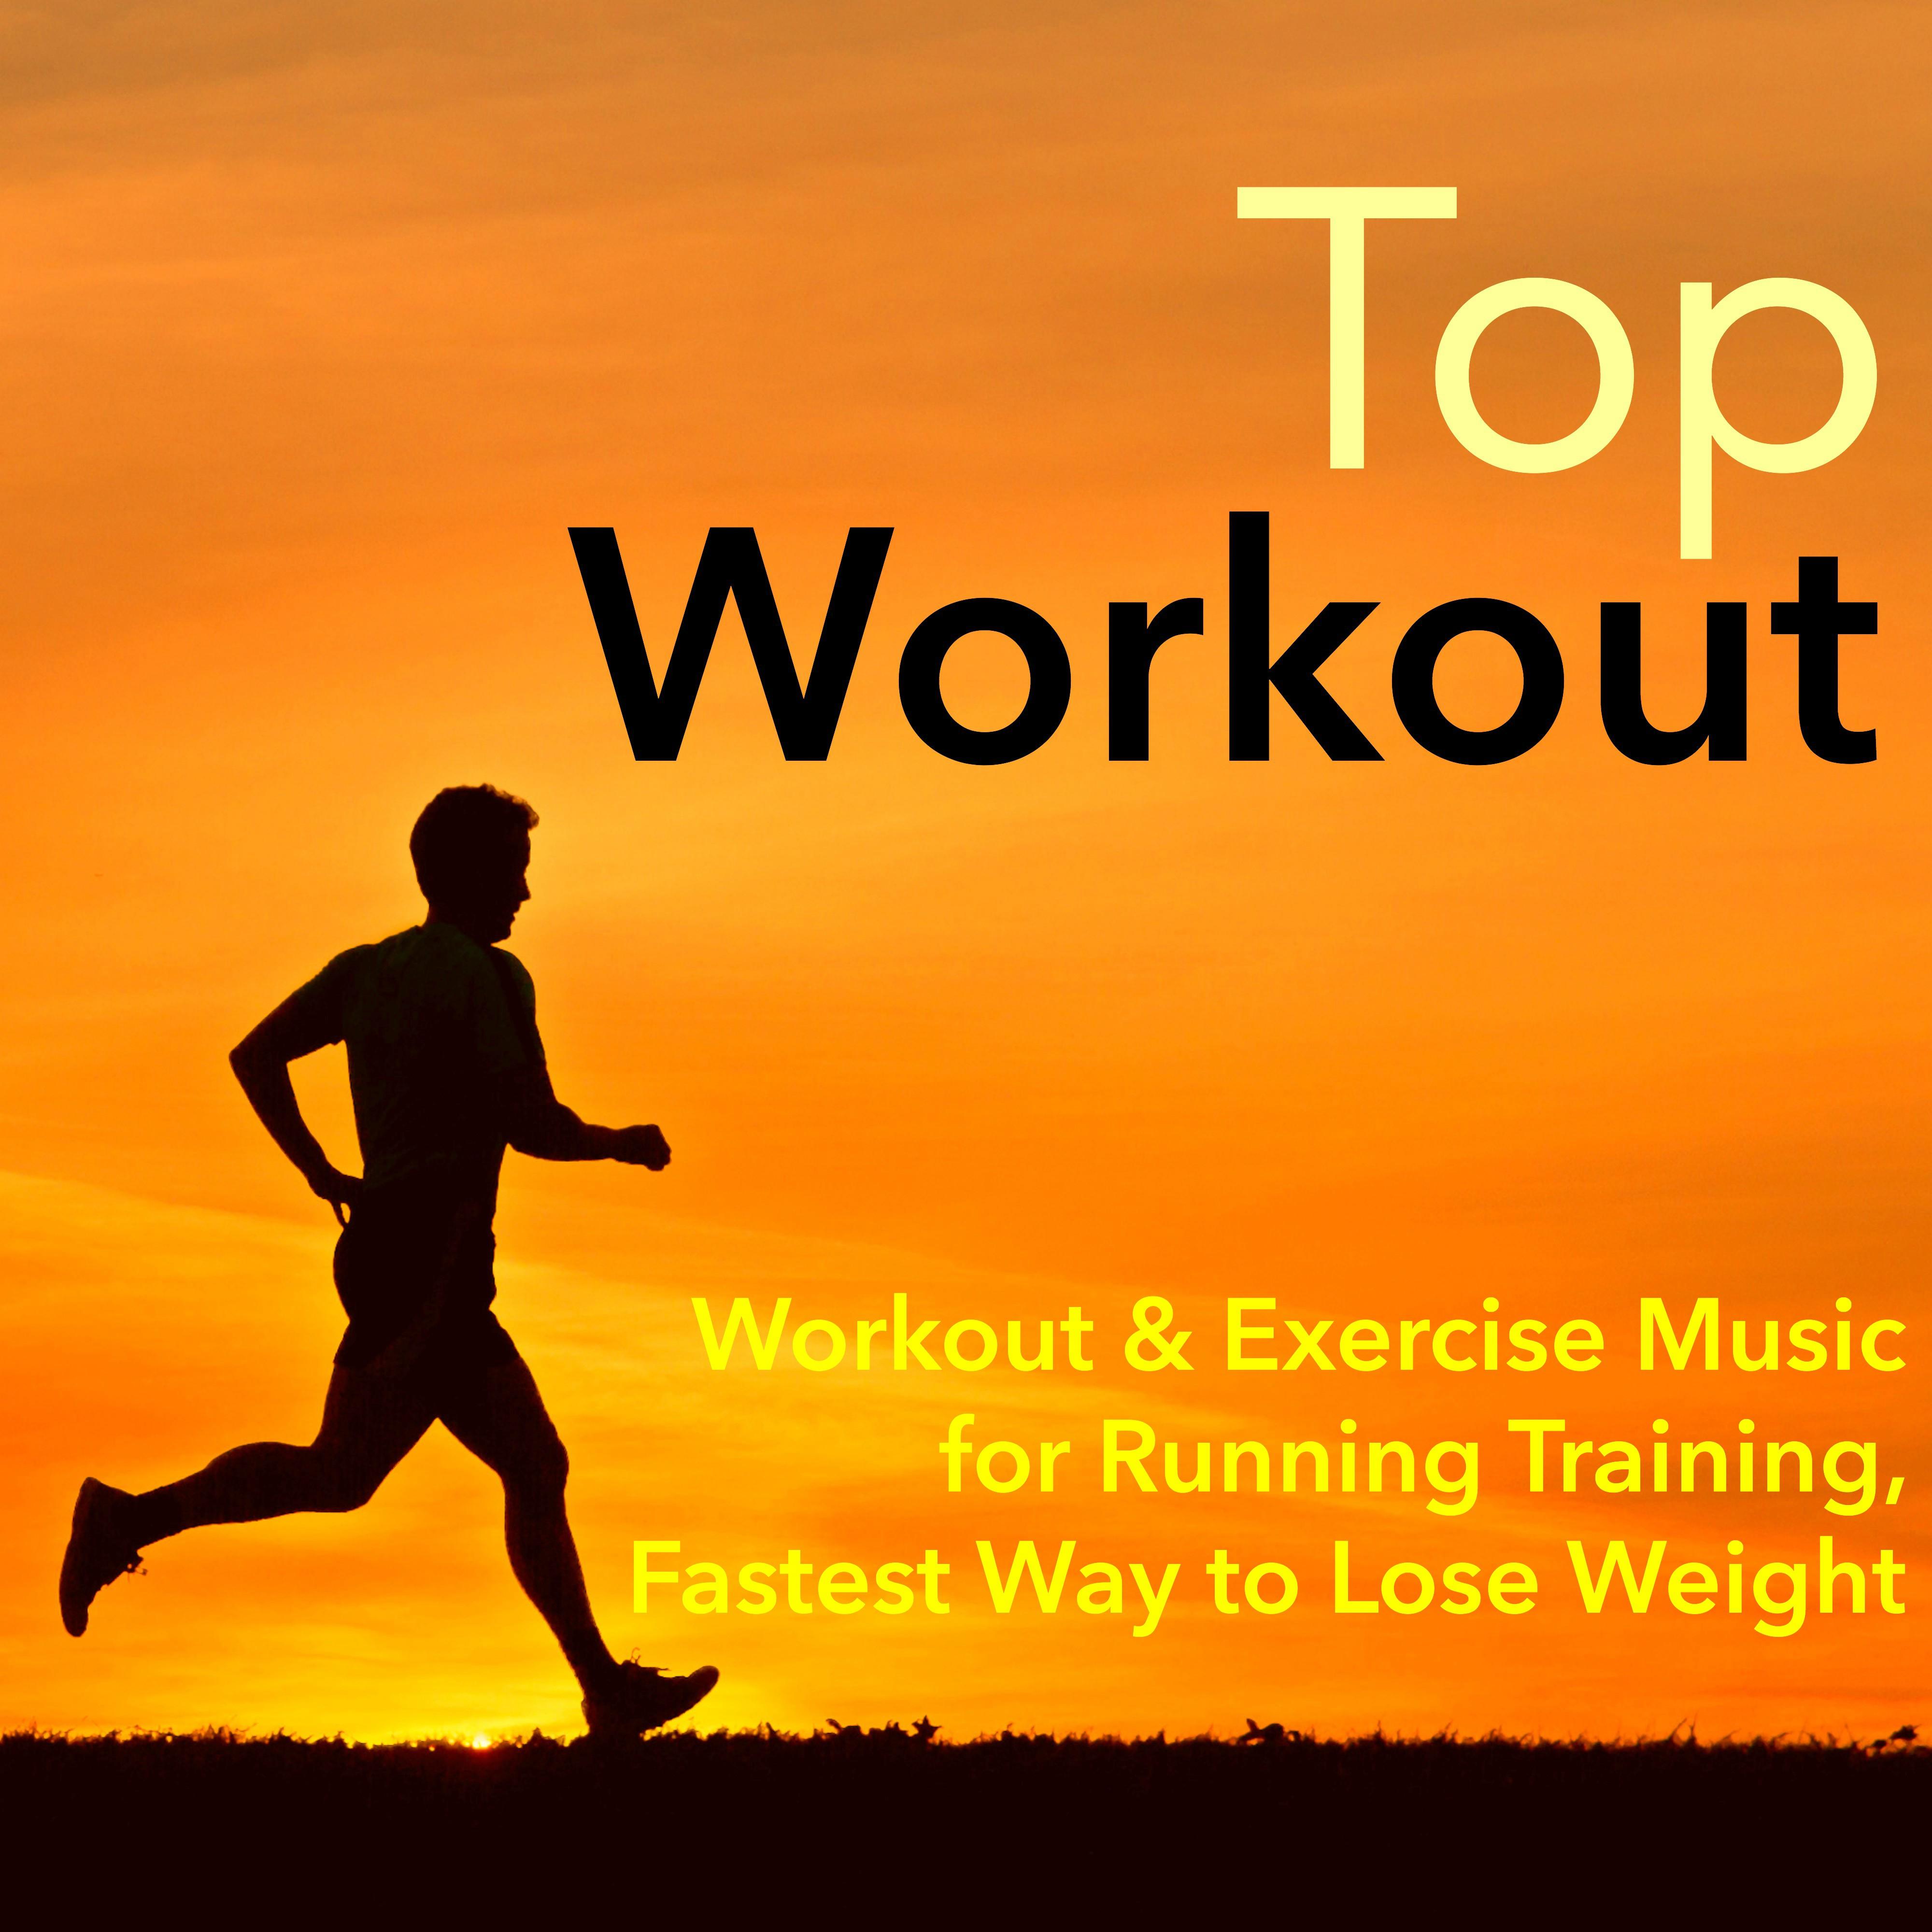 Top Workout - Workout & Exercise Music for Running Training, Fastest Way to Lose Weight and Get Healthy Sexy Body, Deep House, Minimal & Techno Music to Burn Fat